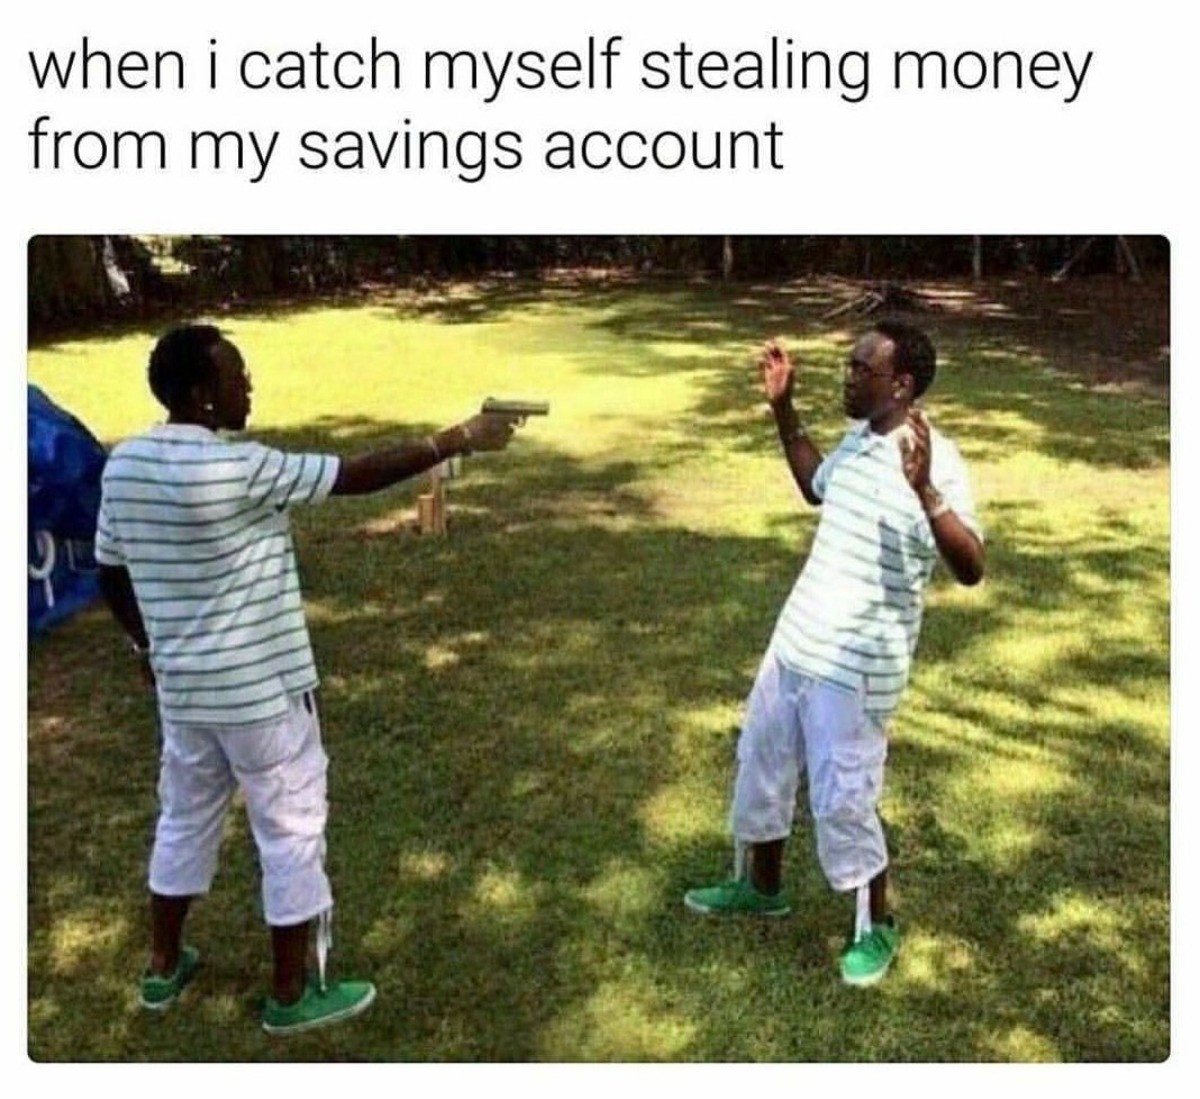 He was of stealing the money